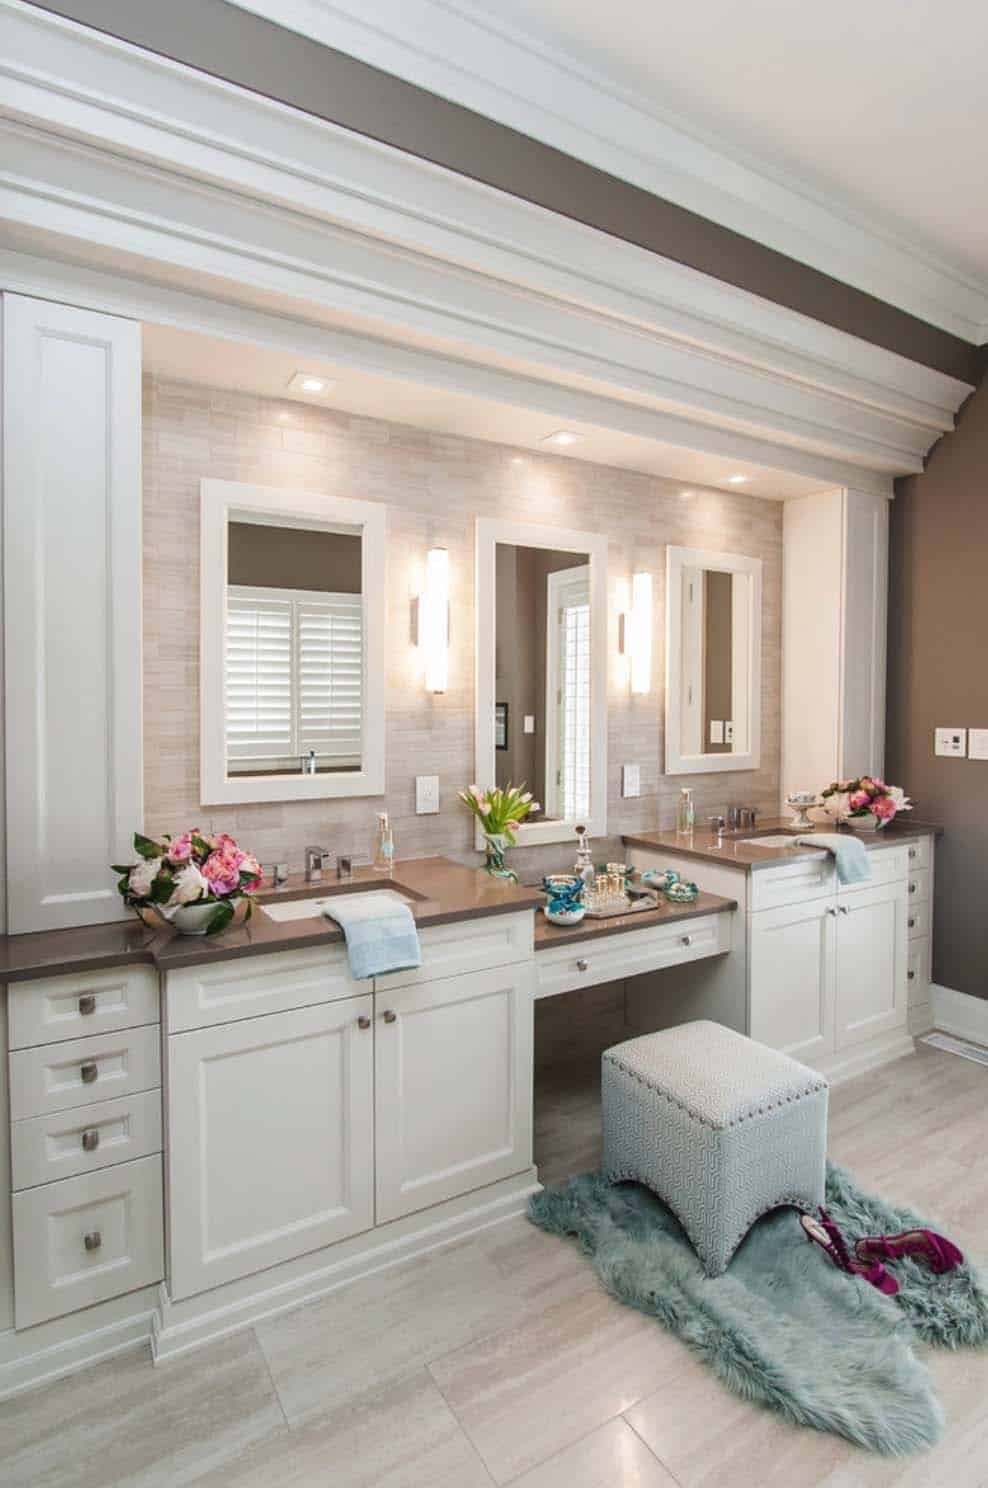 Classic Bathroom Design
 53 Most fabulous traditional style bathroom designs ever